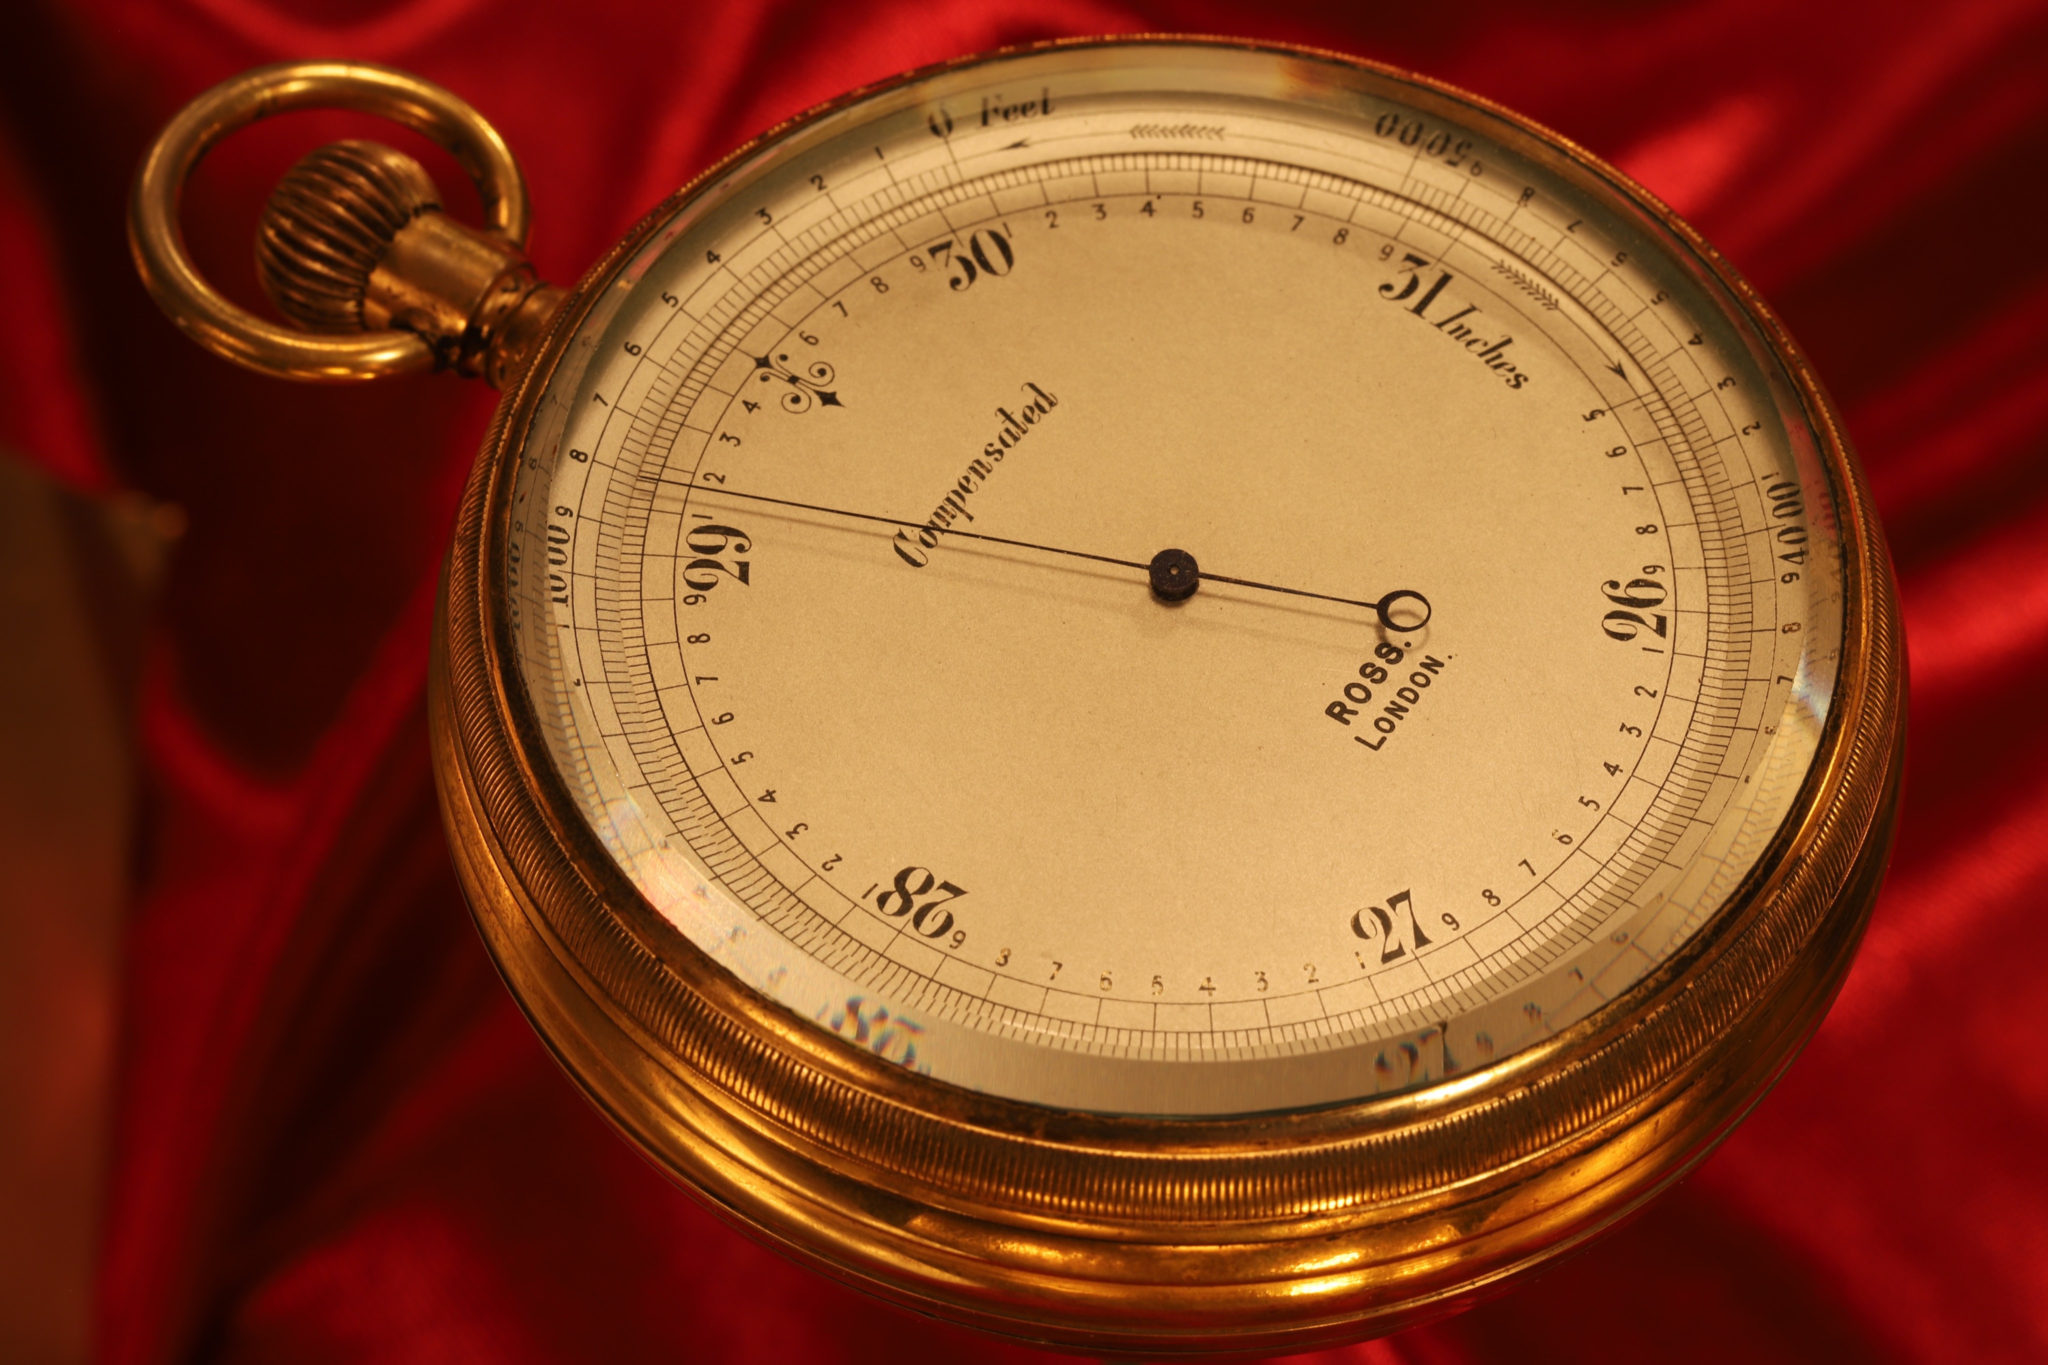 Image of Large Pocket Barometer by Ross Owned by Kate Fleming